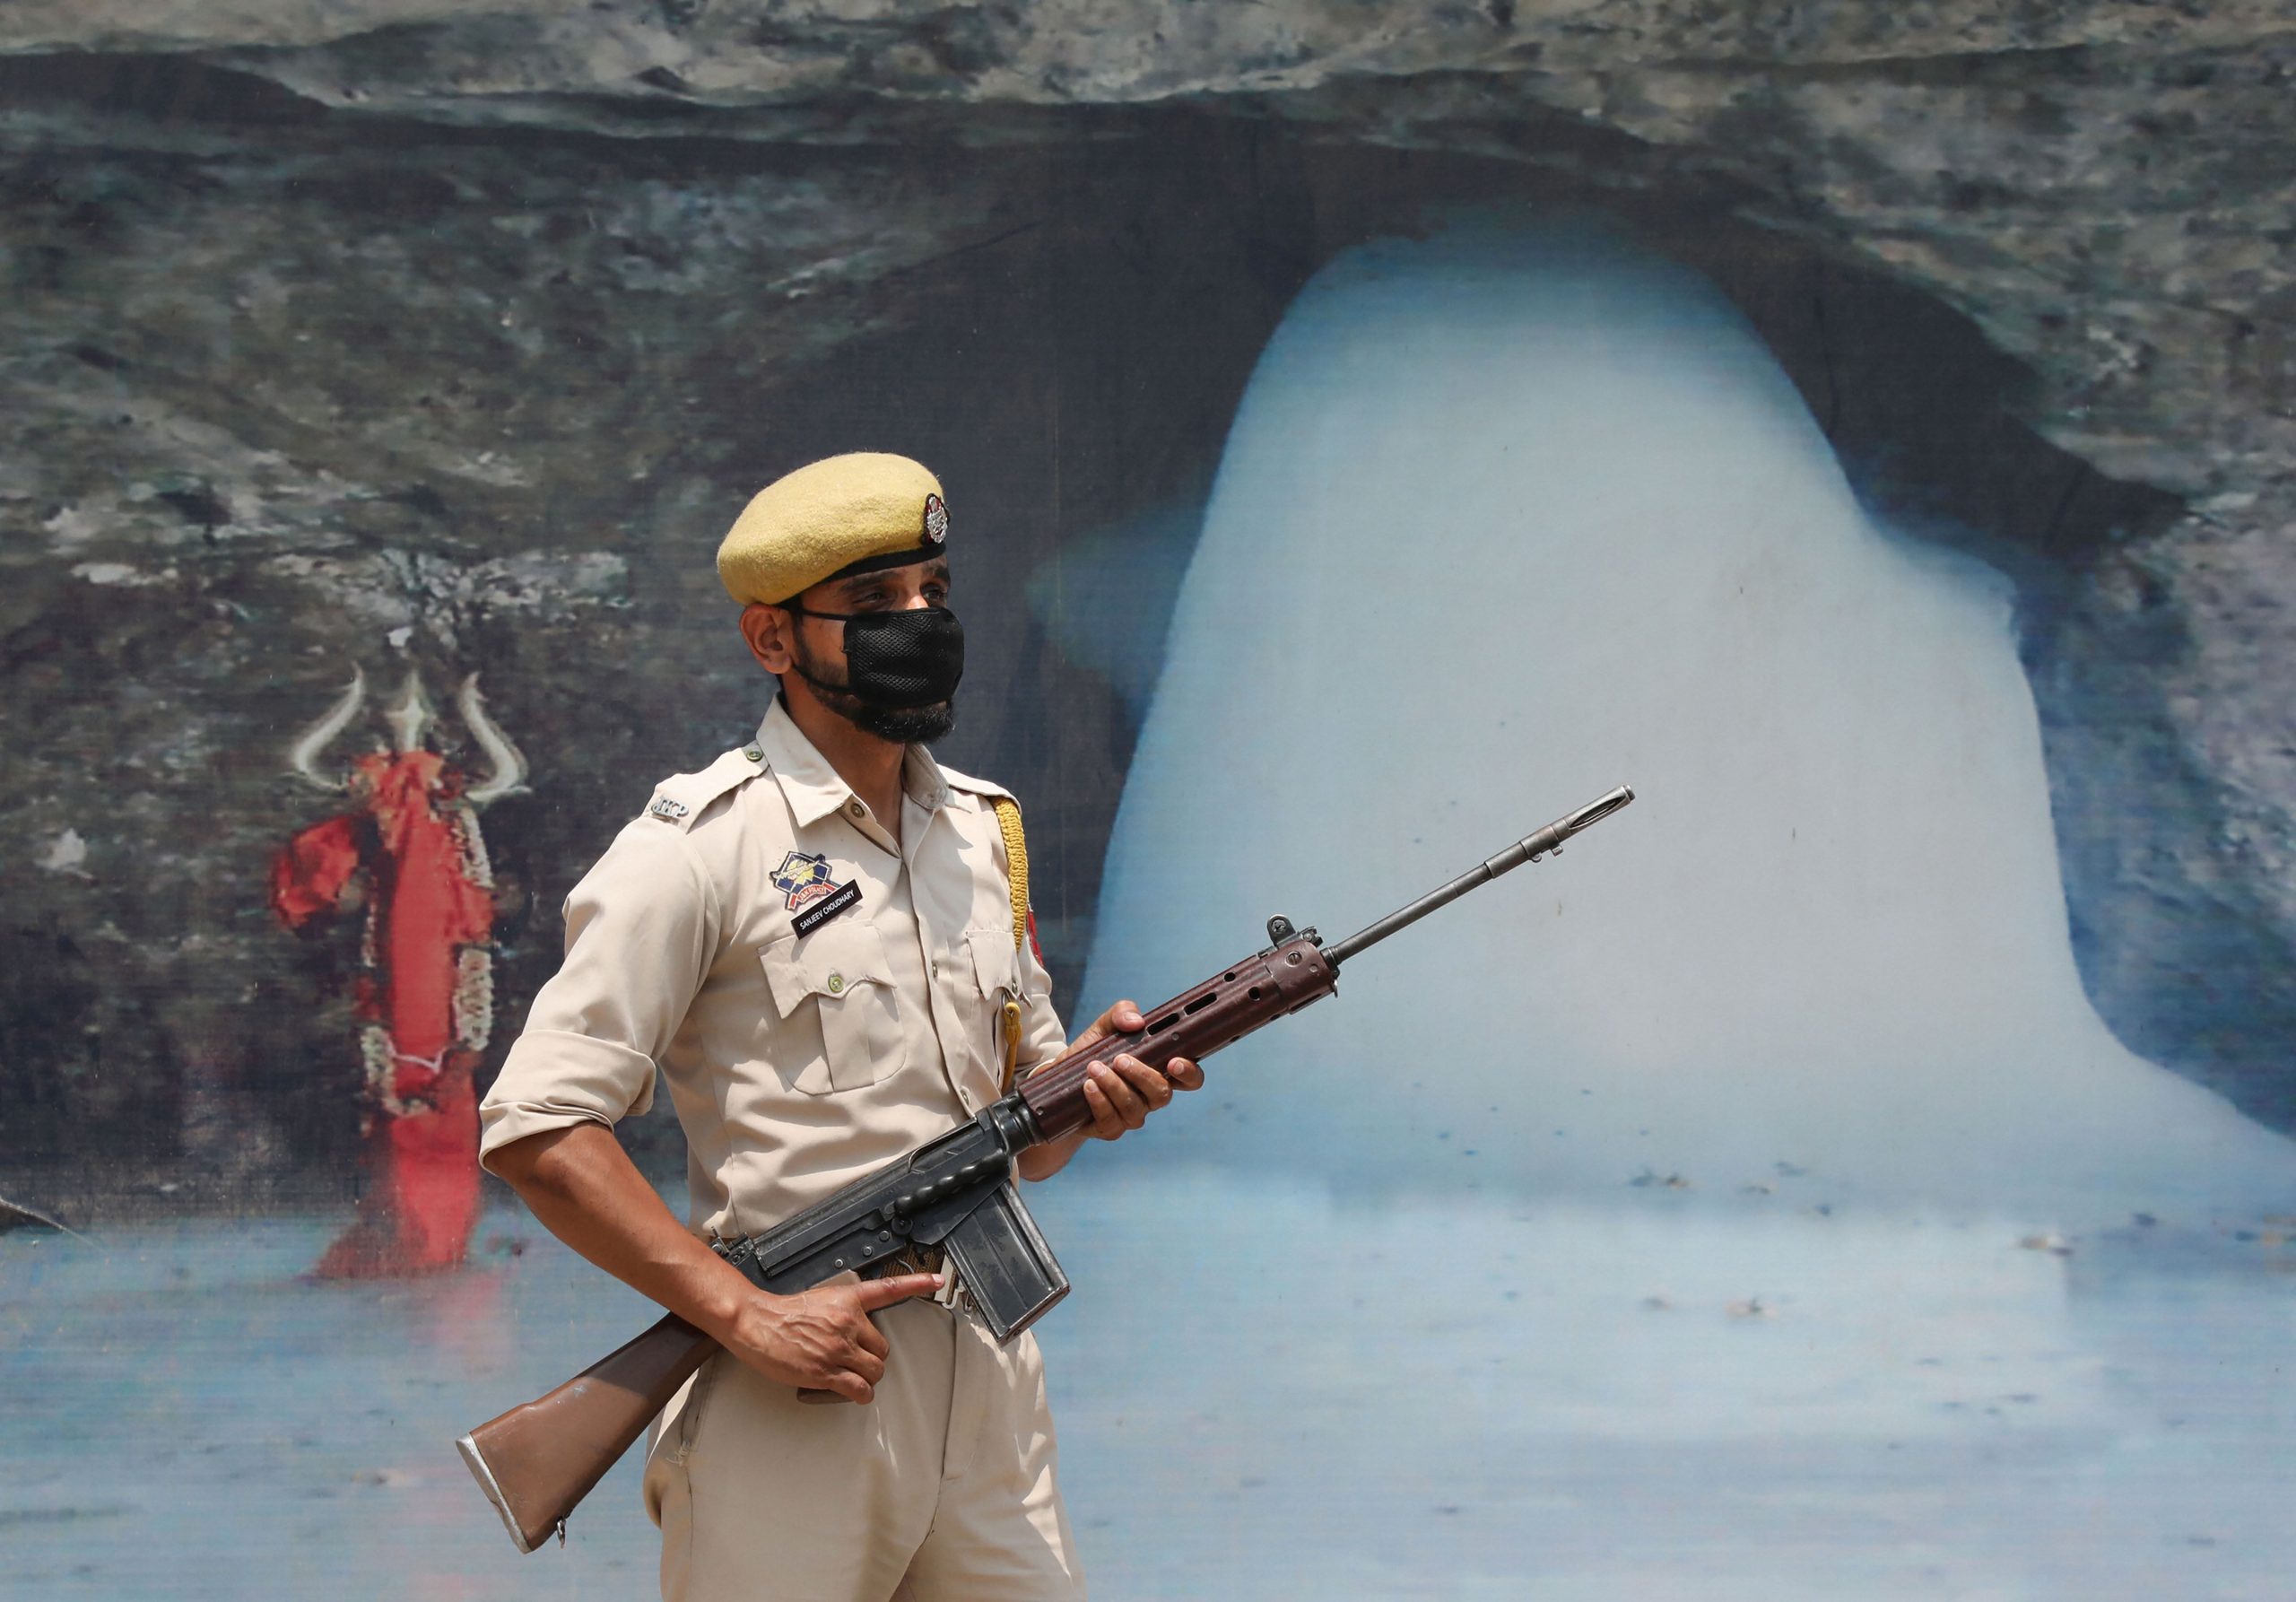 Annual Amarnath Yatra to start from June 28, registrations from April 1